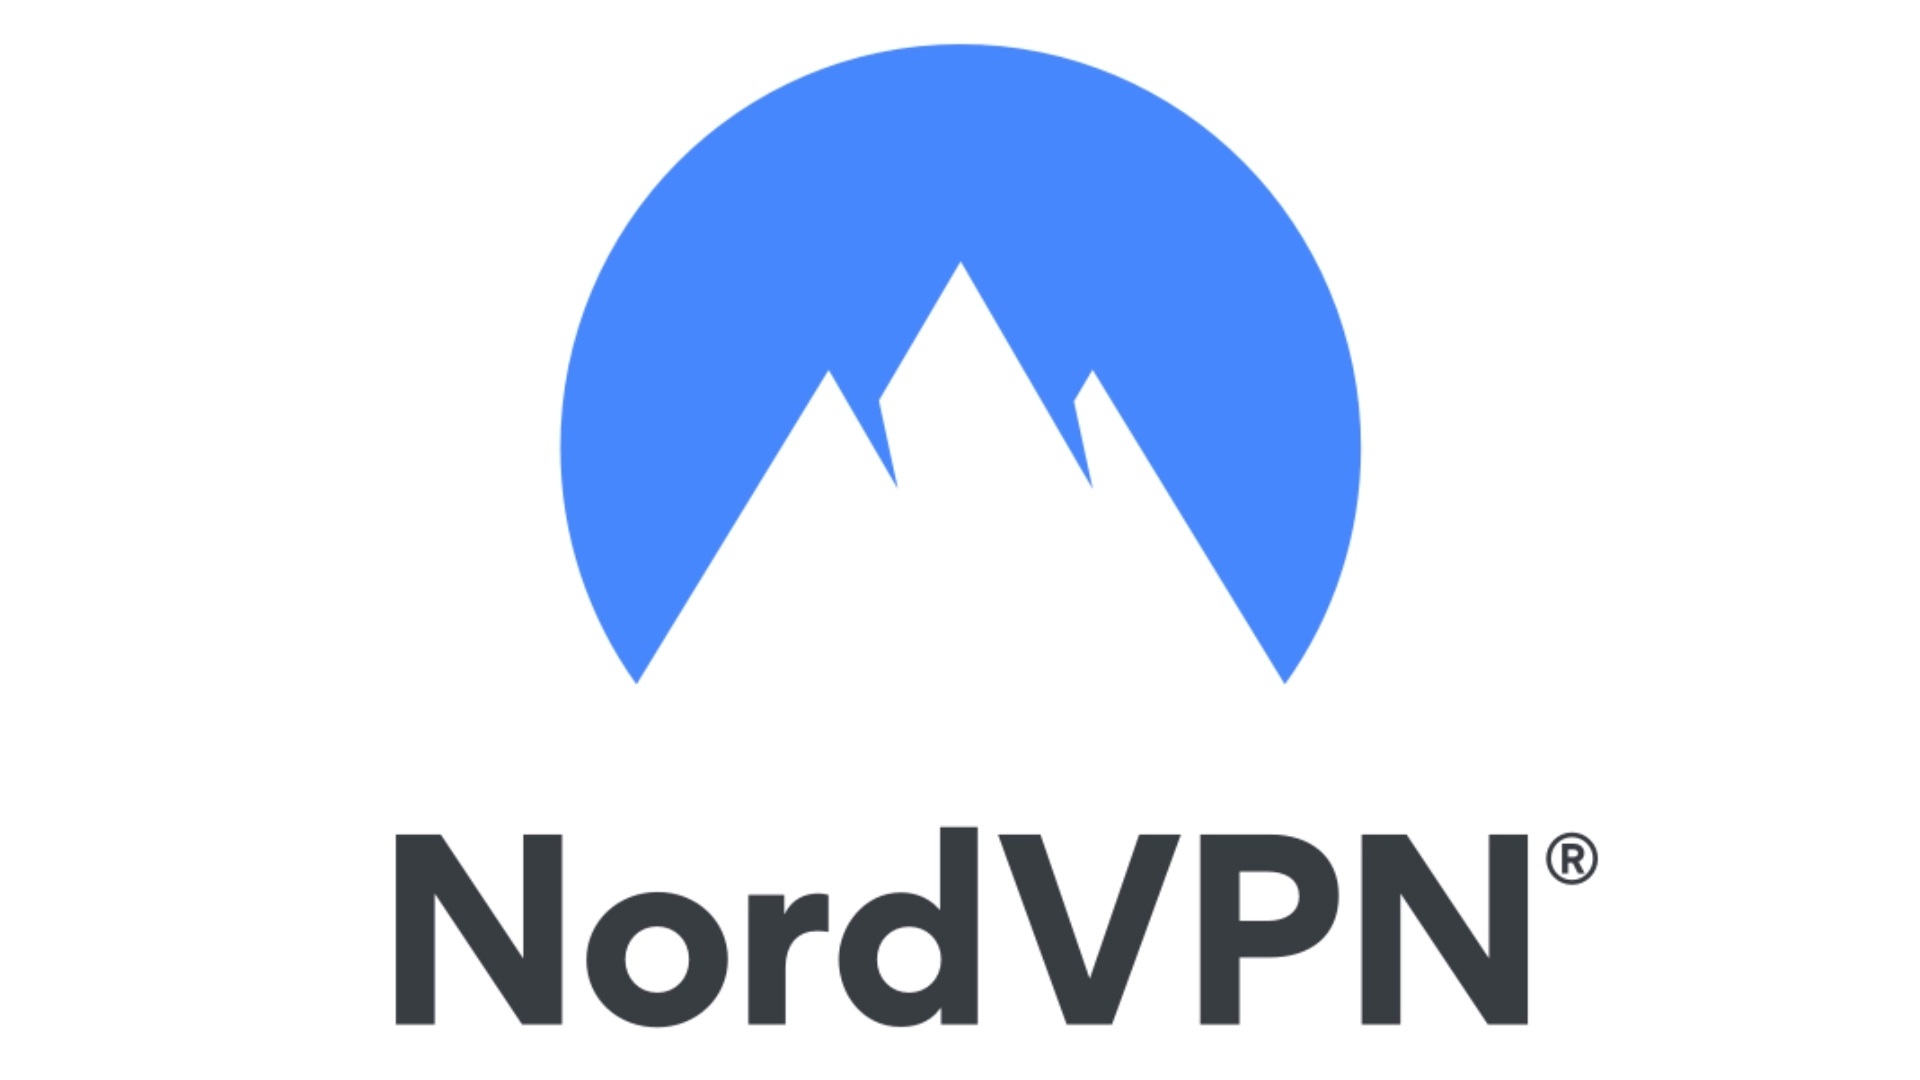 Best Windows 10 VPN, NordVPN. Image shows the company's logo on a white background.